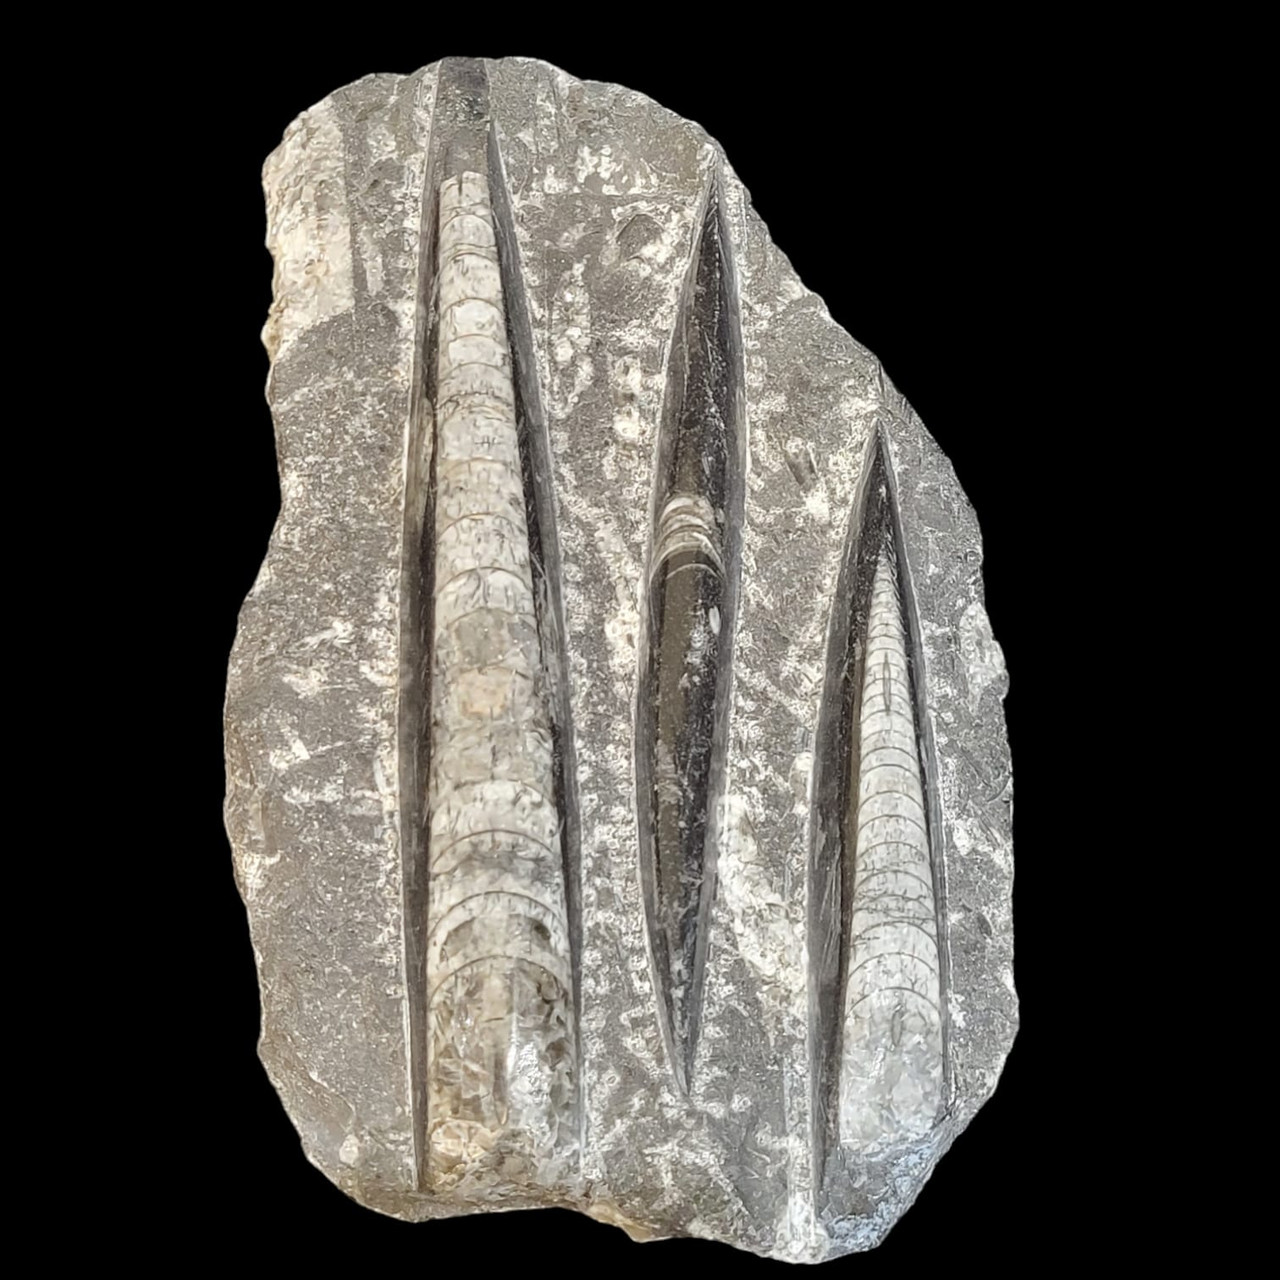 Discover Gaea Rare's Orthoceras Squid Fossil—a geological marvel representing Earth's ancient seas. Unveil the scientific intricacies of this extinct marine cephalopod, showcasing the preserved remains with characteristic long, straight shell segments.